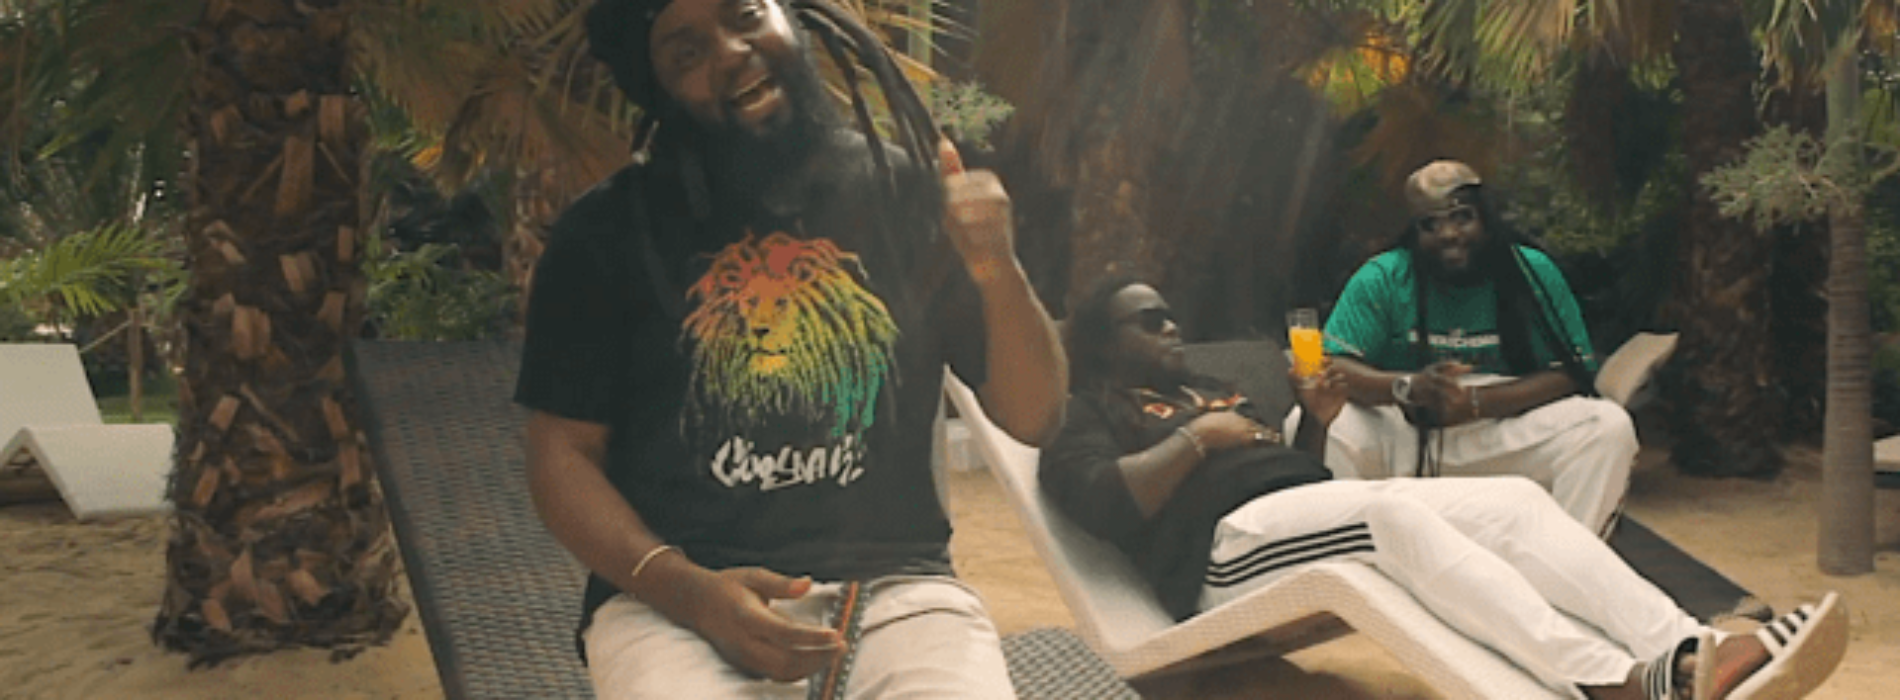 Morgan Heritage – Beach & Country (Official Music Video) – Juillet 2019